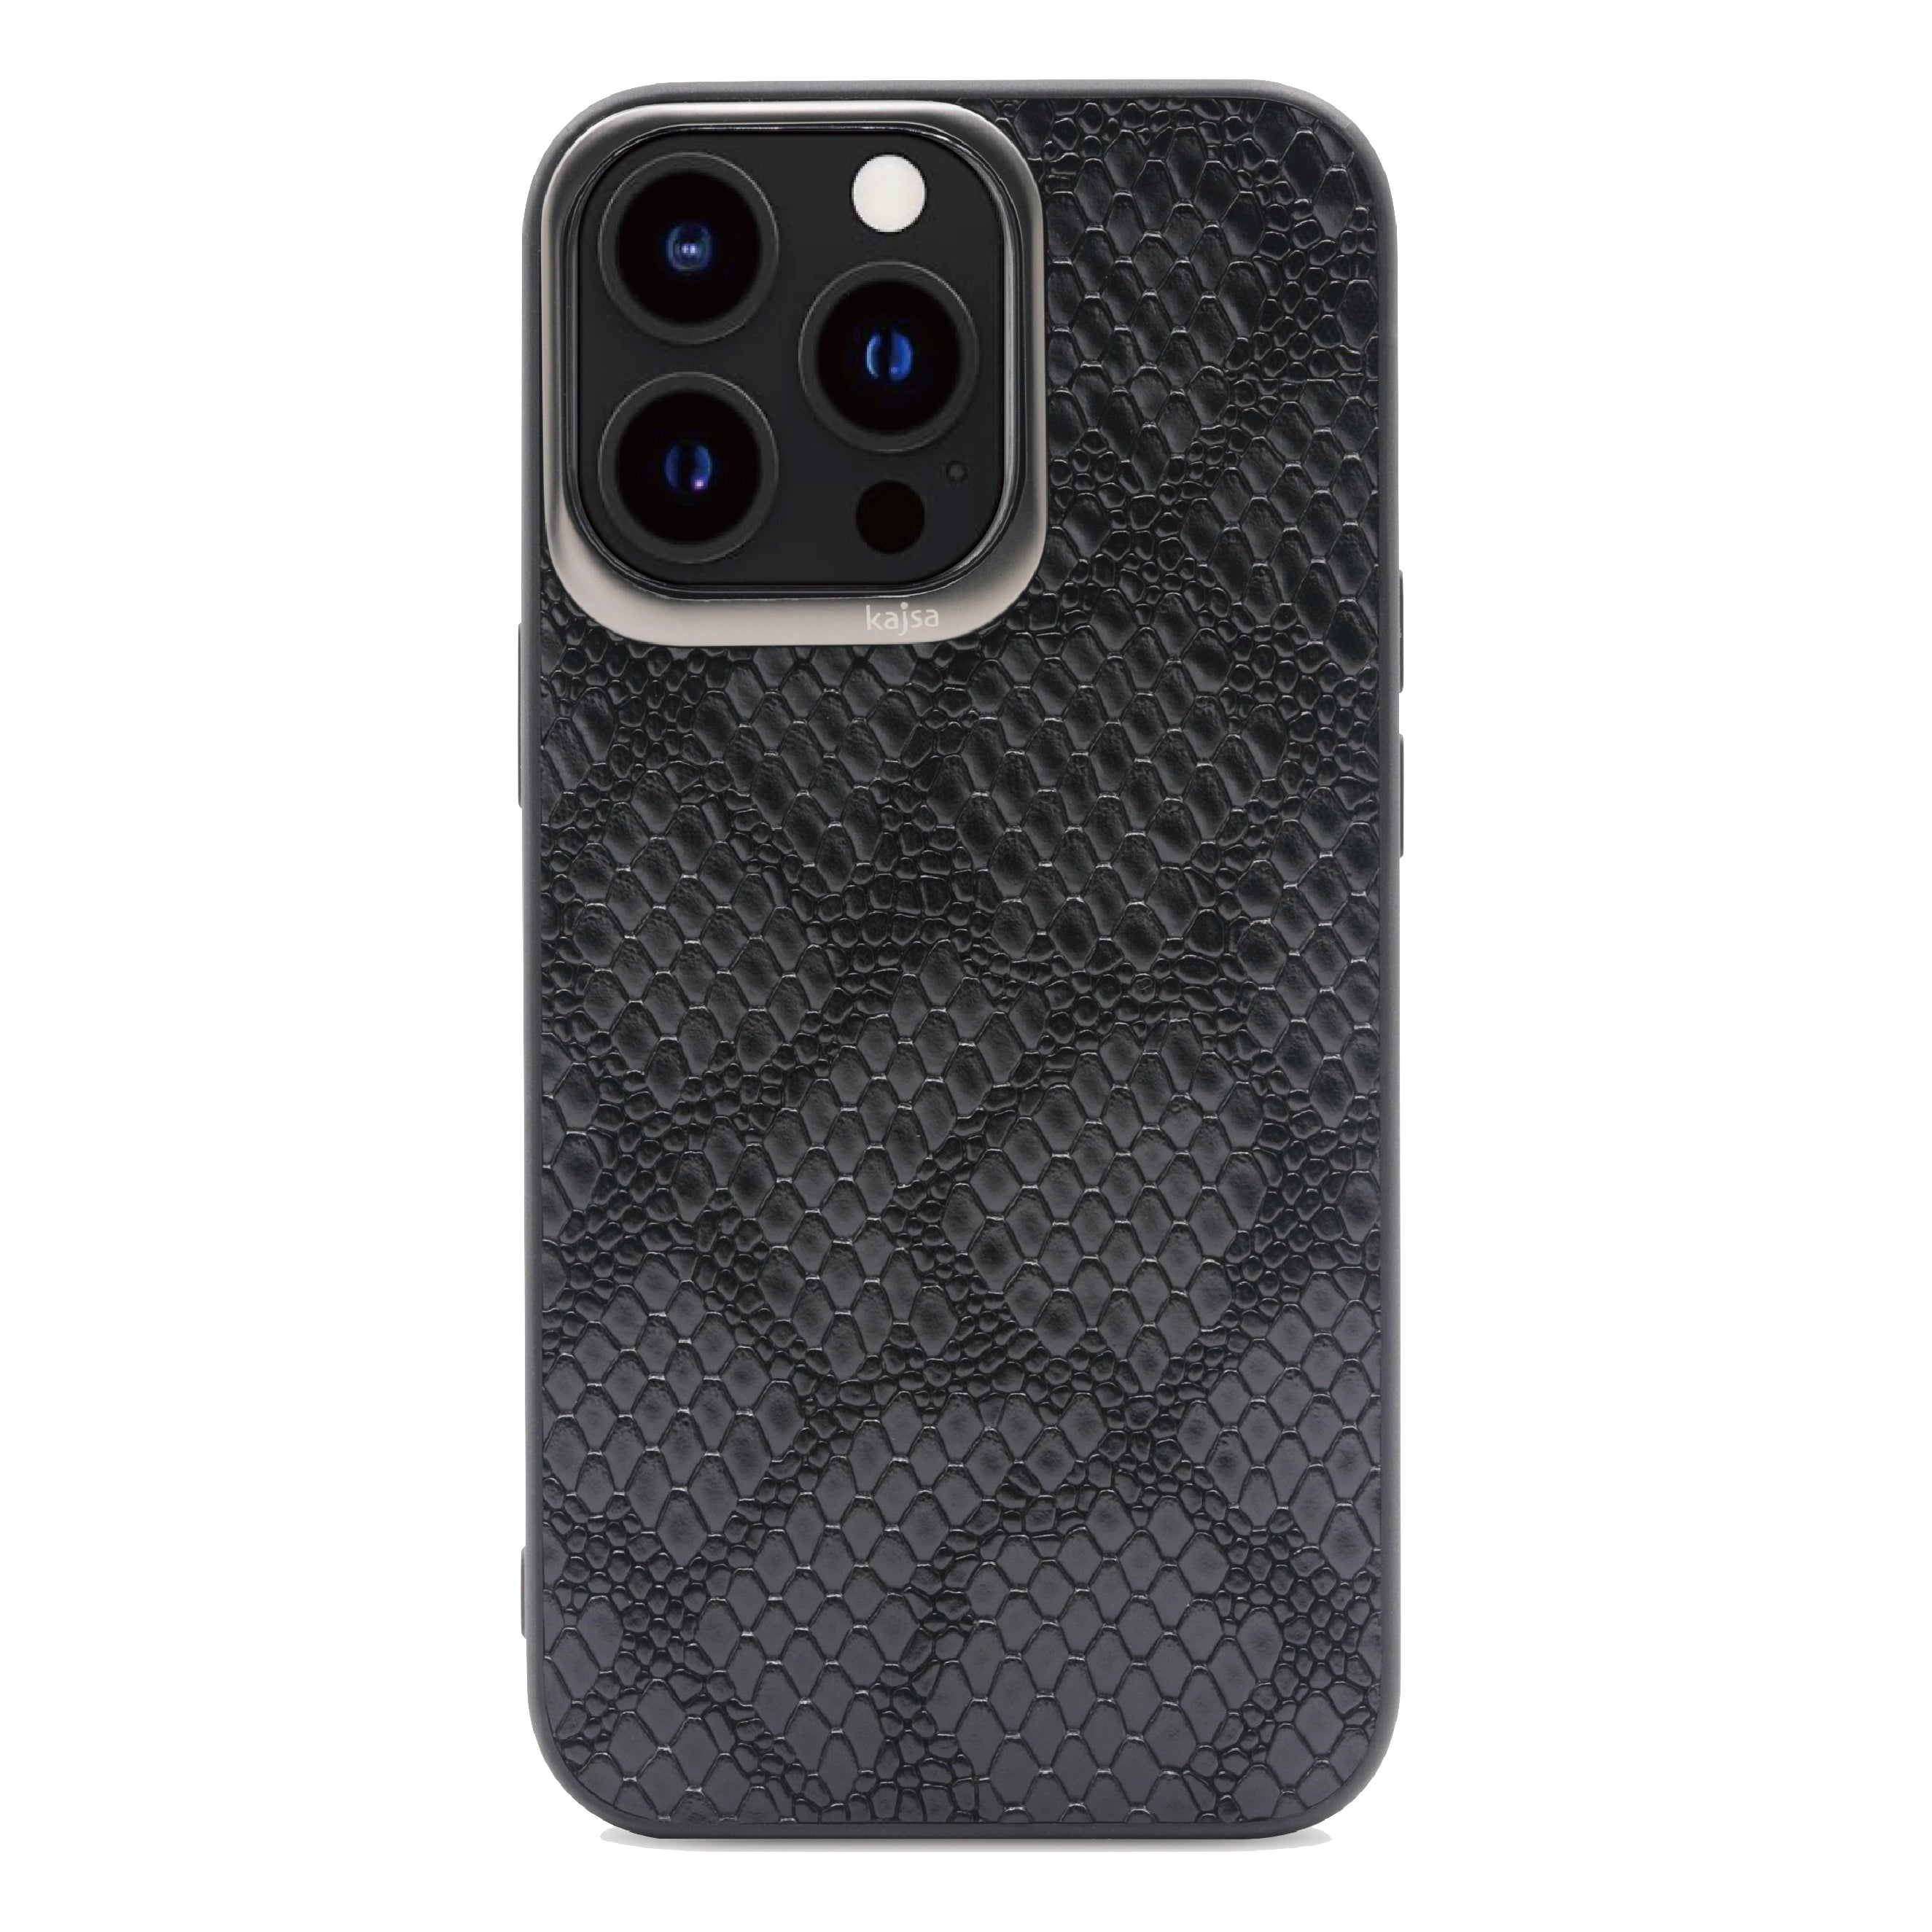 Glamorous Collection - Complex Lizard Back Case for iPhone 13-Phone Case- phone case - phone cases- phone cover- iphone cover- iphone case- iphone cases- leather case- leather cases- DIYCASE - custom case - leather cover - hand strap case - croco pattern case - snake pattern case - carbon fiber phone case - phone case brand - unique phone case - high quality - phone case brand - protective case - buy phone case hong kong - online buy phone case - iphone‎手機殼 - 客製化手機殼 - samsung ‎手機殼 - 香港手機殼 - 買電話殼